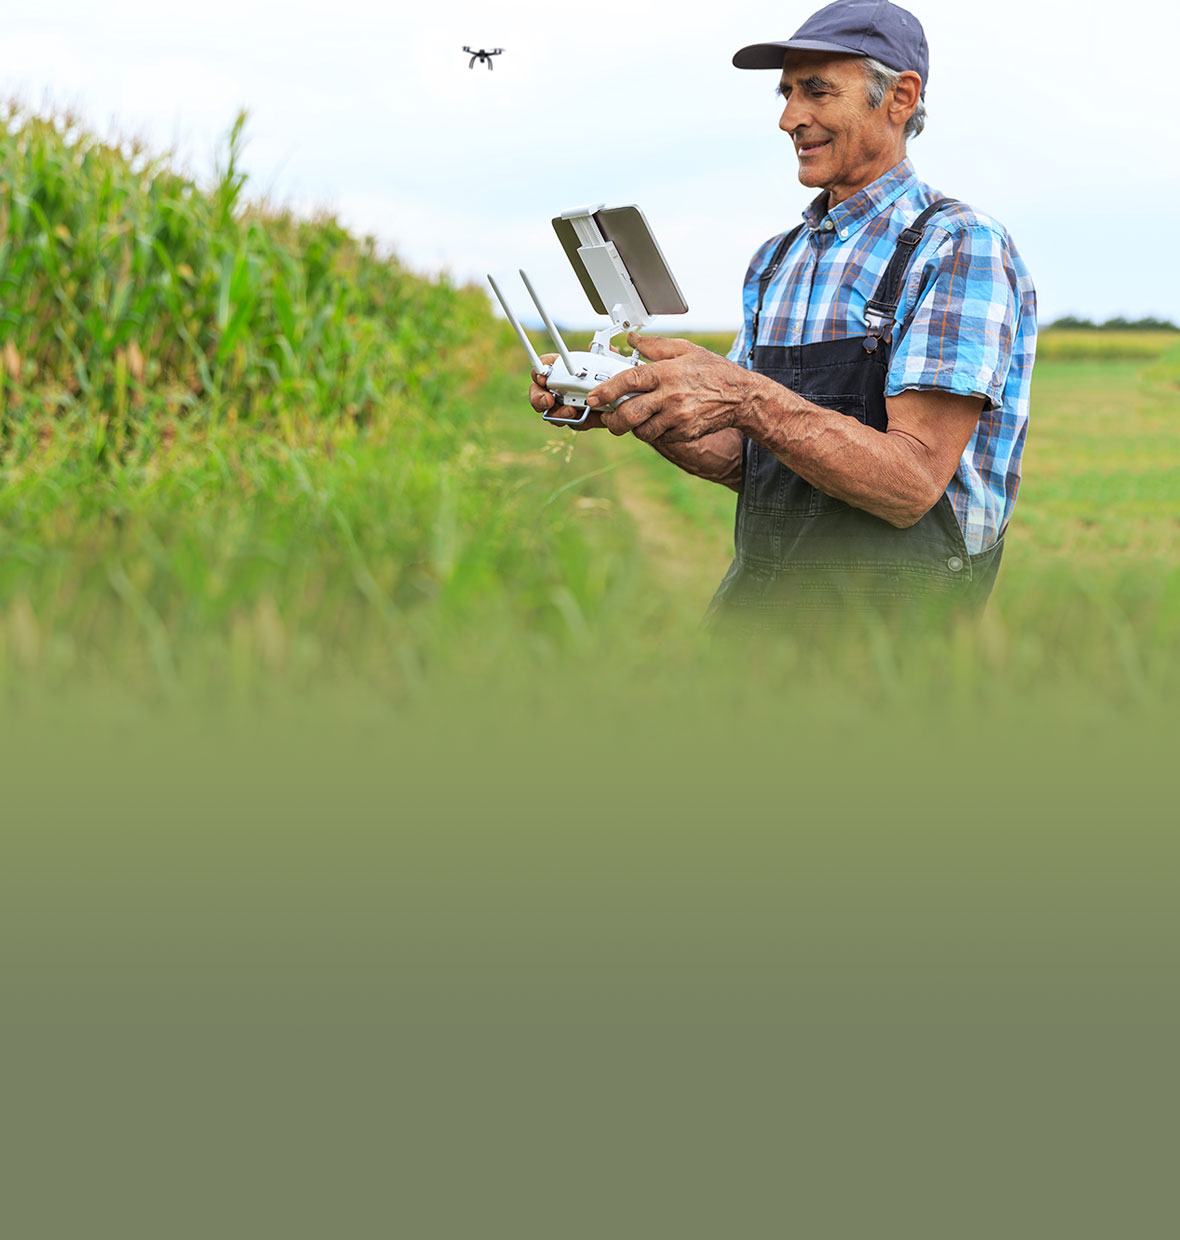 Man in a field with a remote flying a drone 